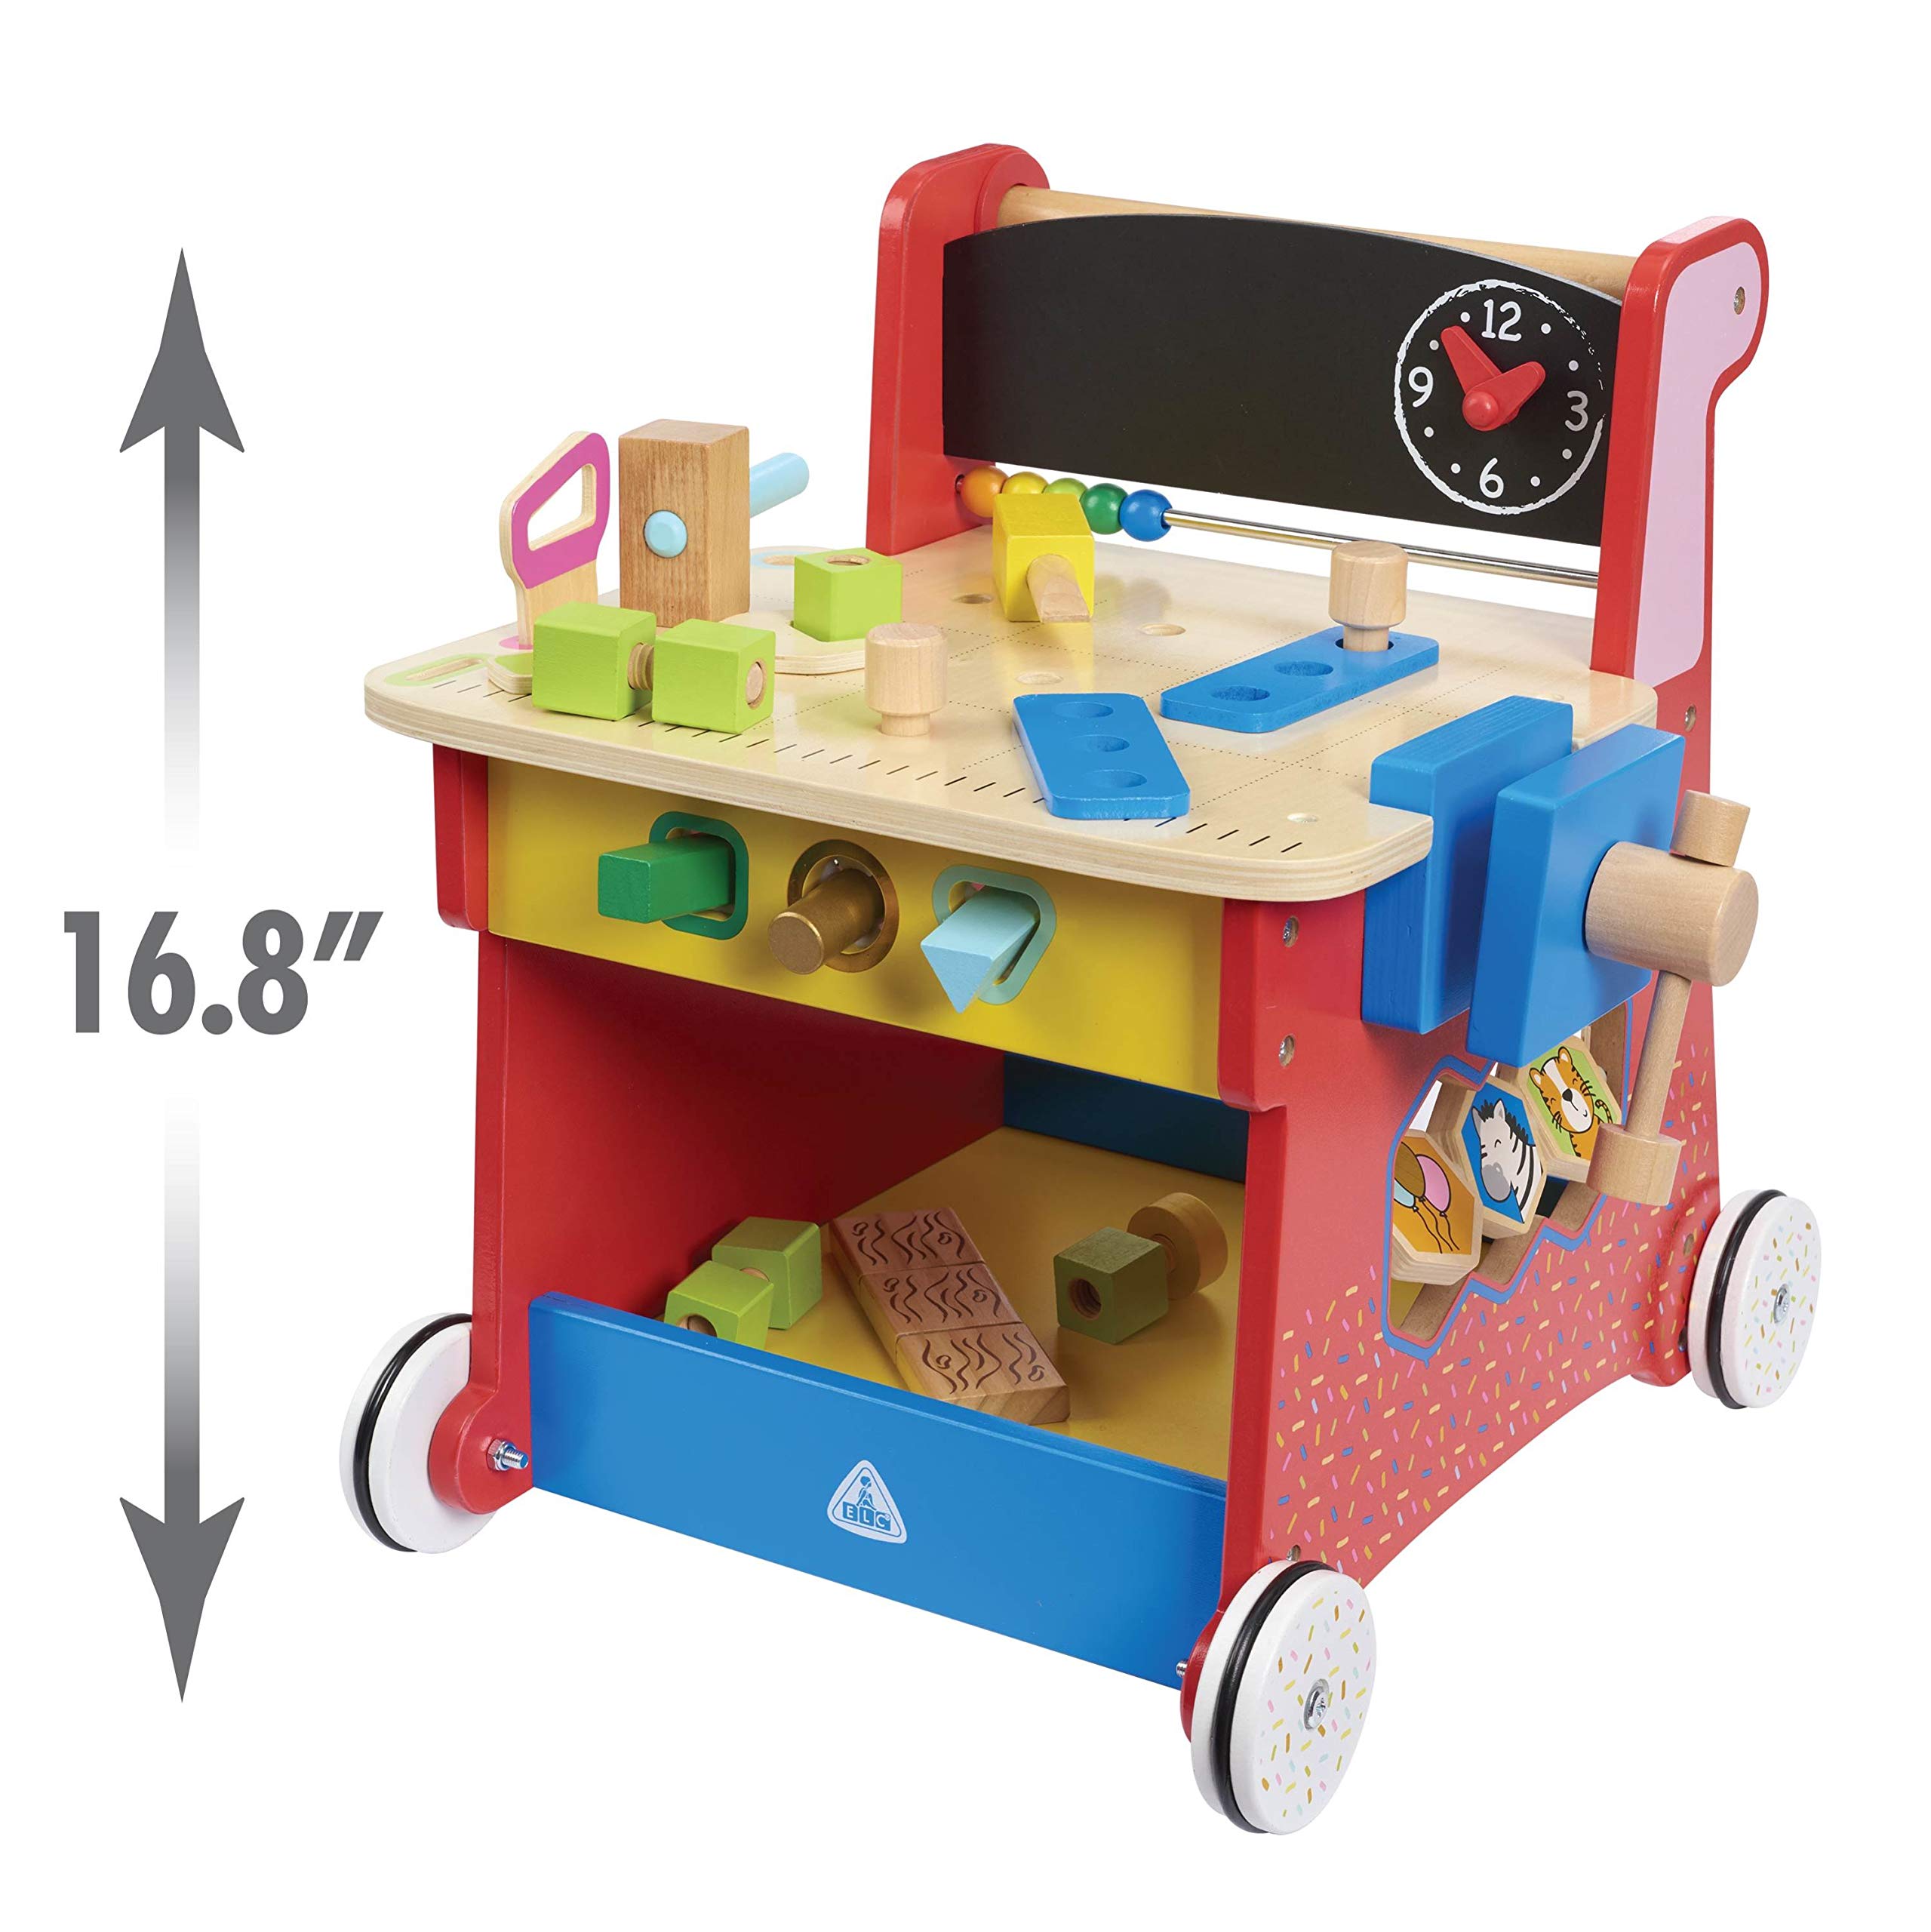 Just Play Early Learning Centre Wooden Activity Workbench $20.79 + Free Shipping w/ Prime or on $25+